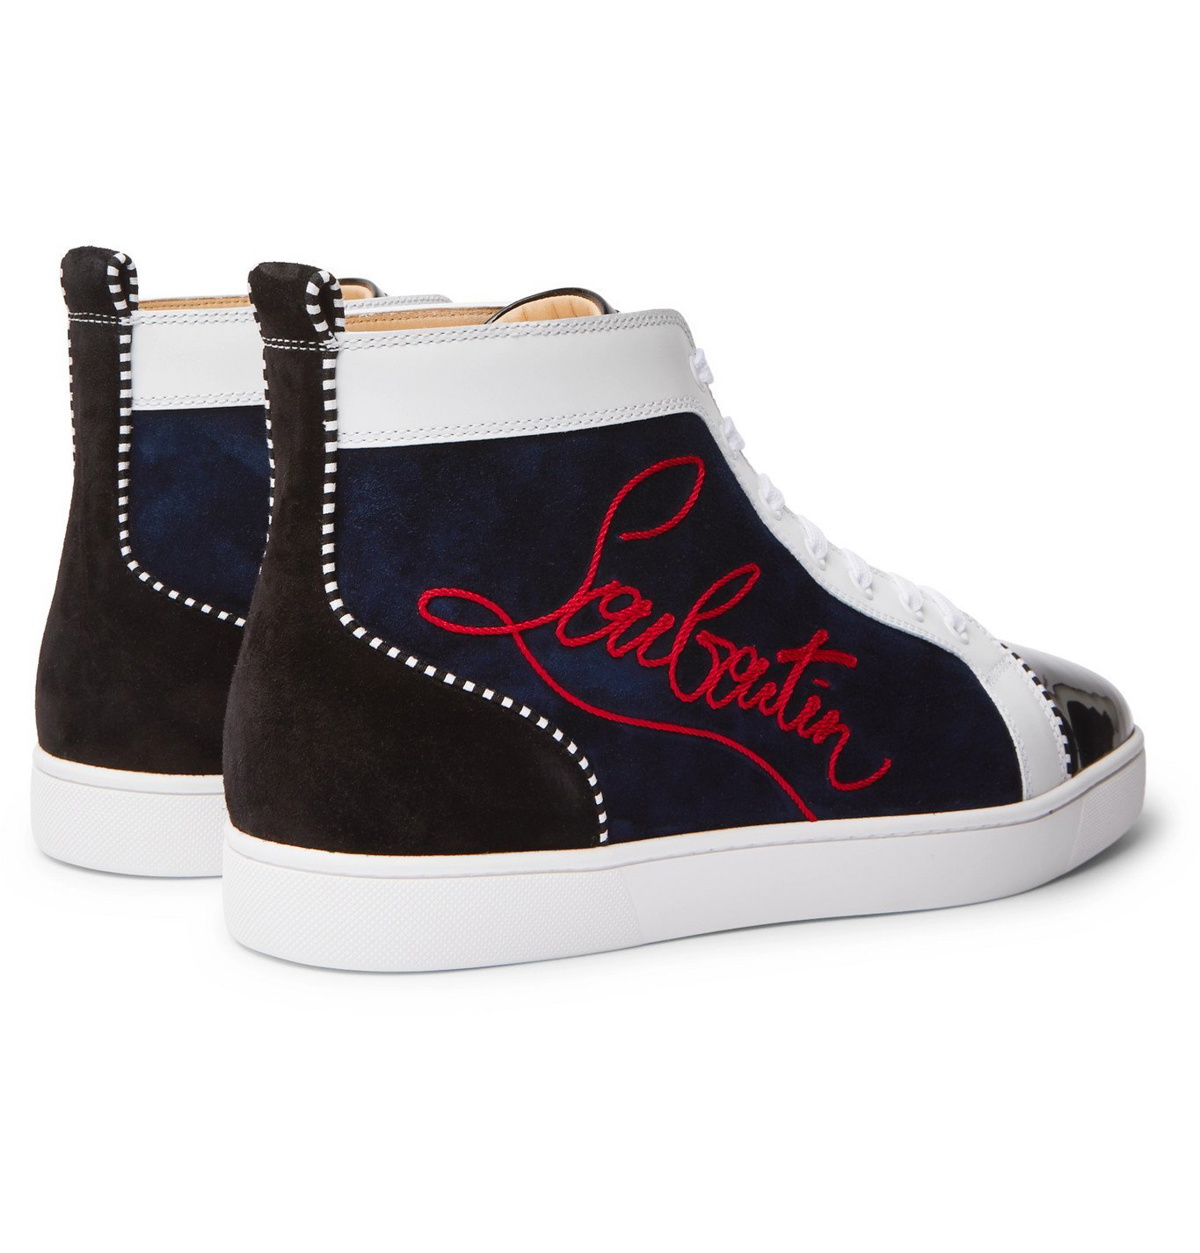 Christian Louboutin Multicolor Denim And Leather Louis Flat High